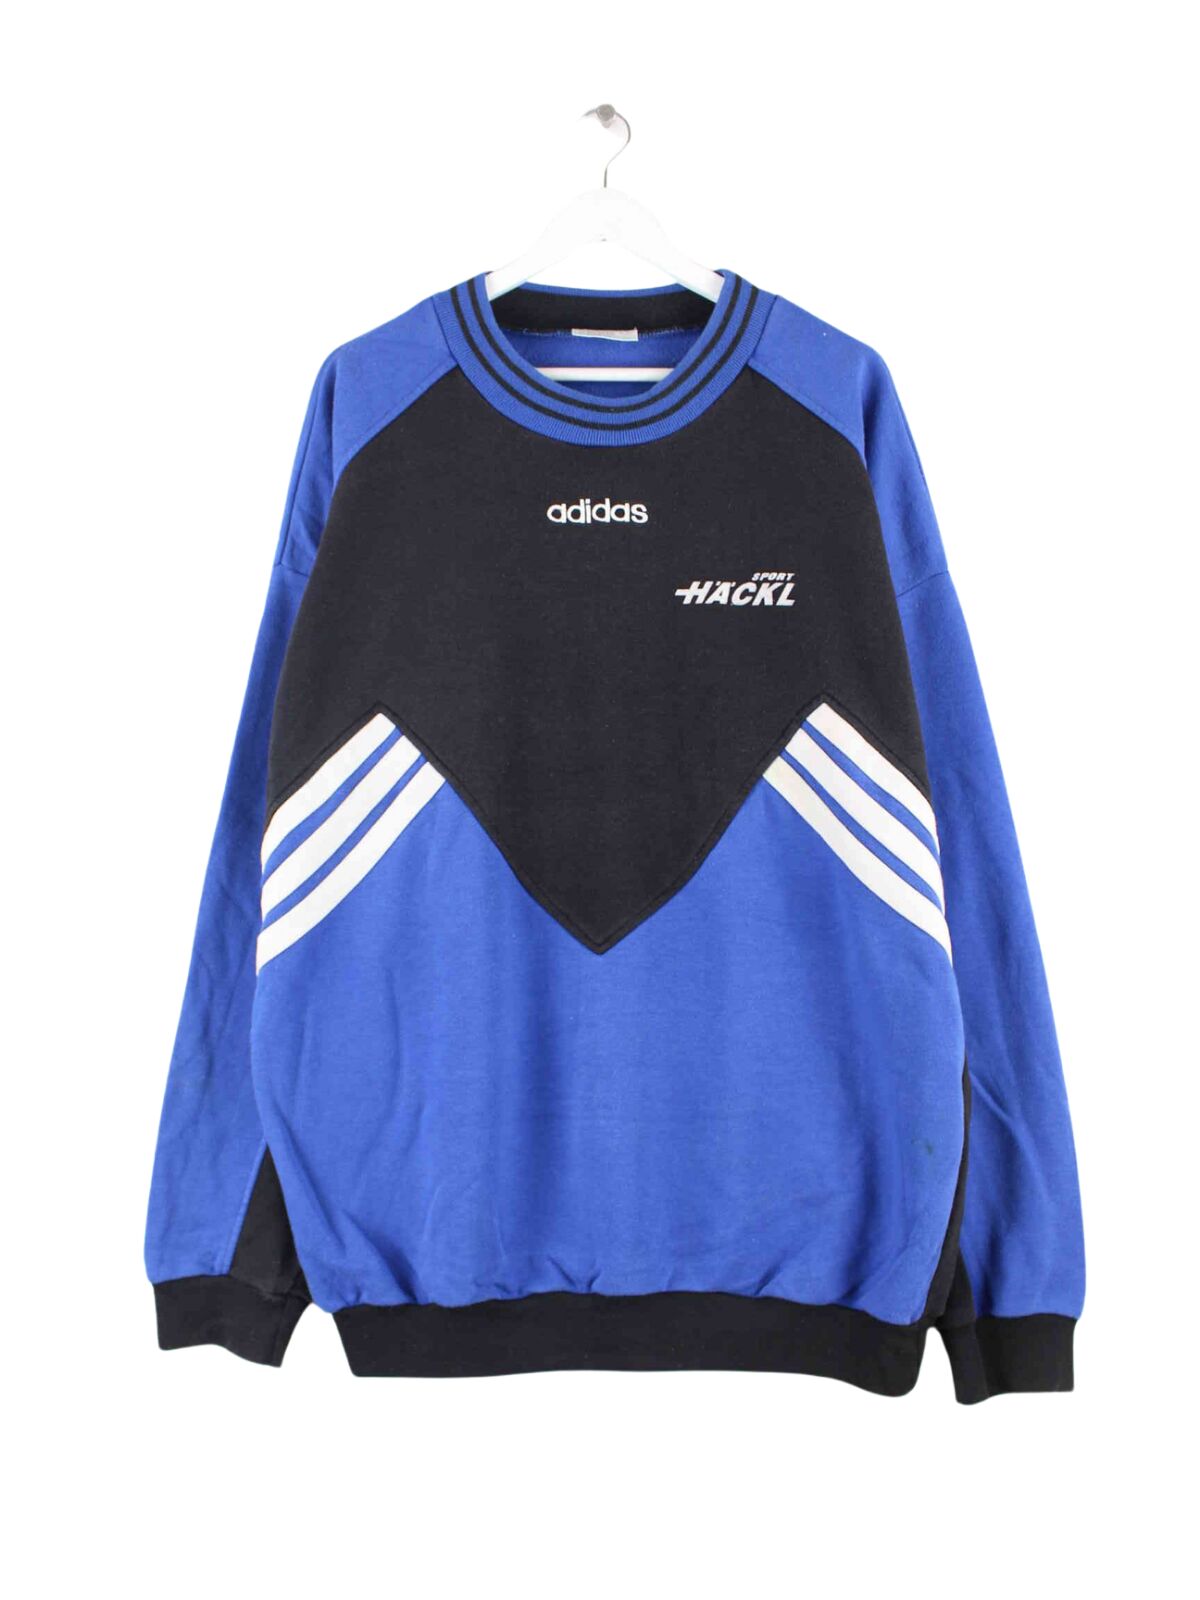 Adidas 80s Vintage Embroidered Football Sweater Blau 3XL (front image)